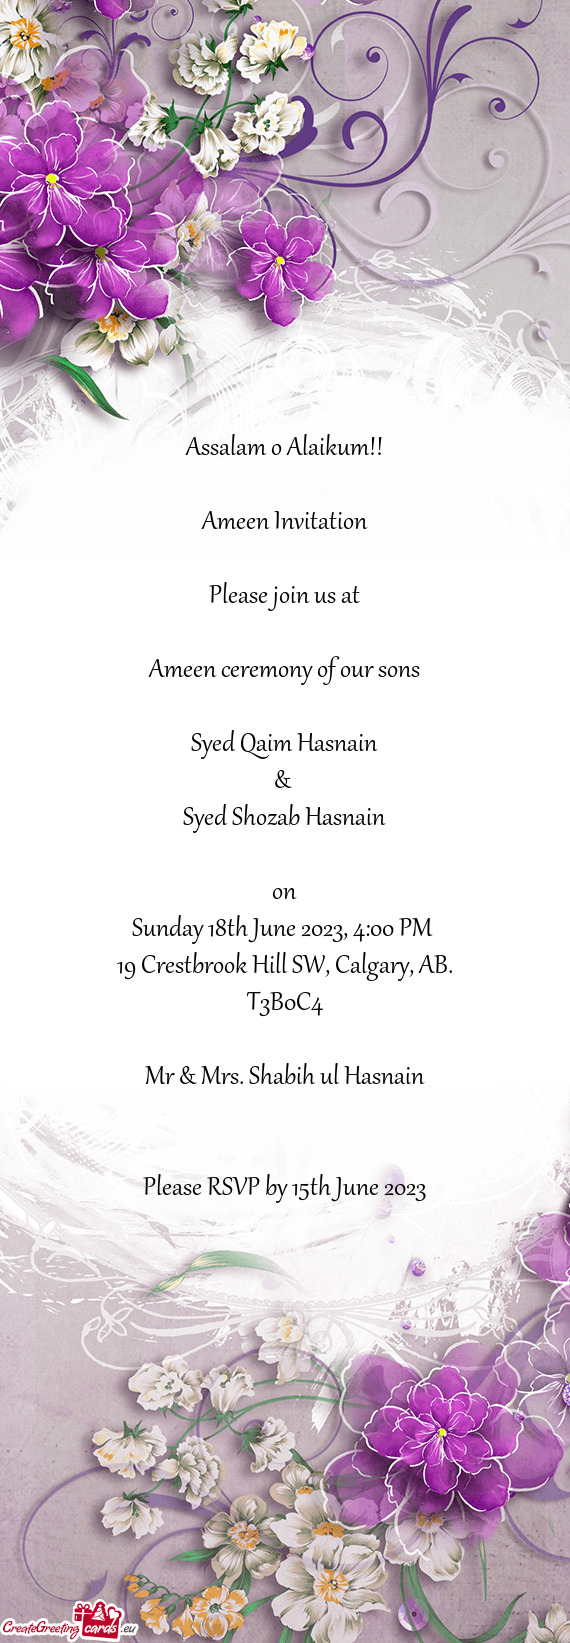 Ameen ceremony of our sons